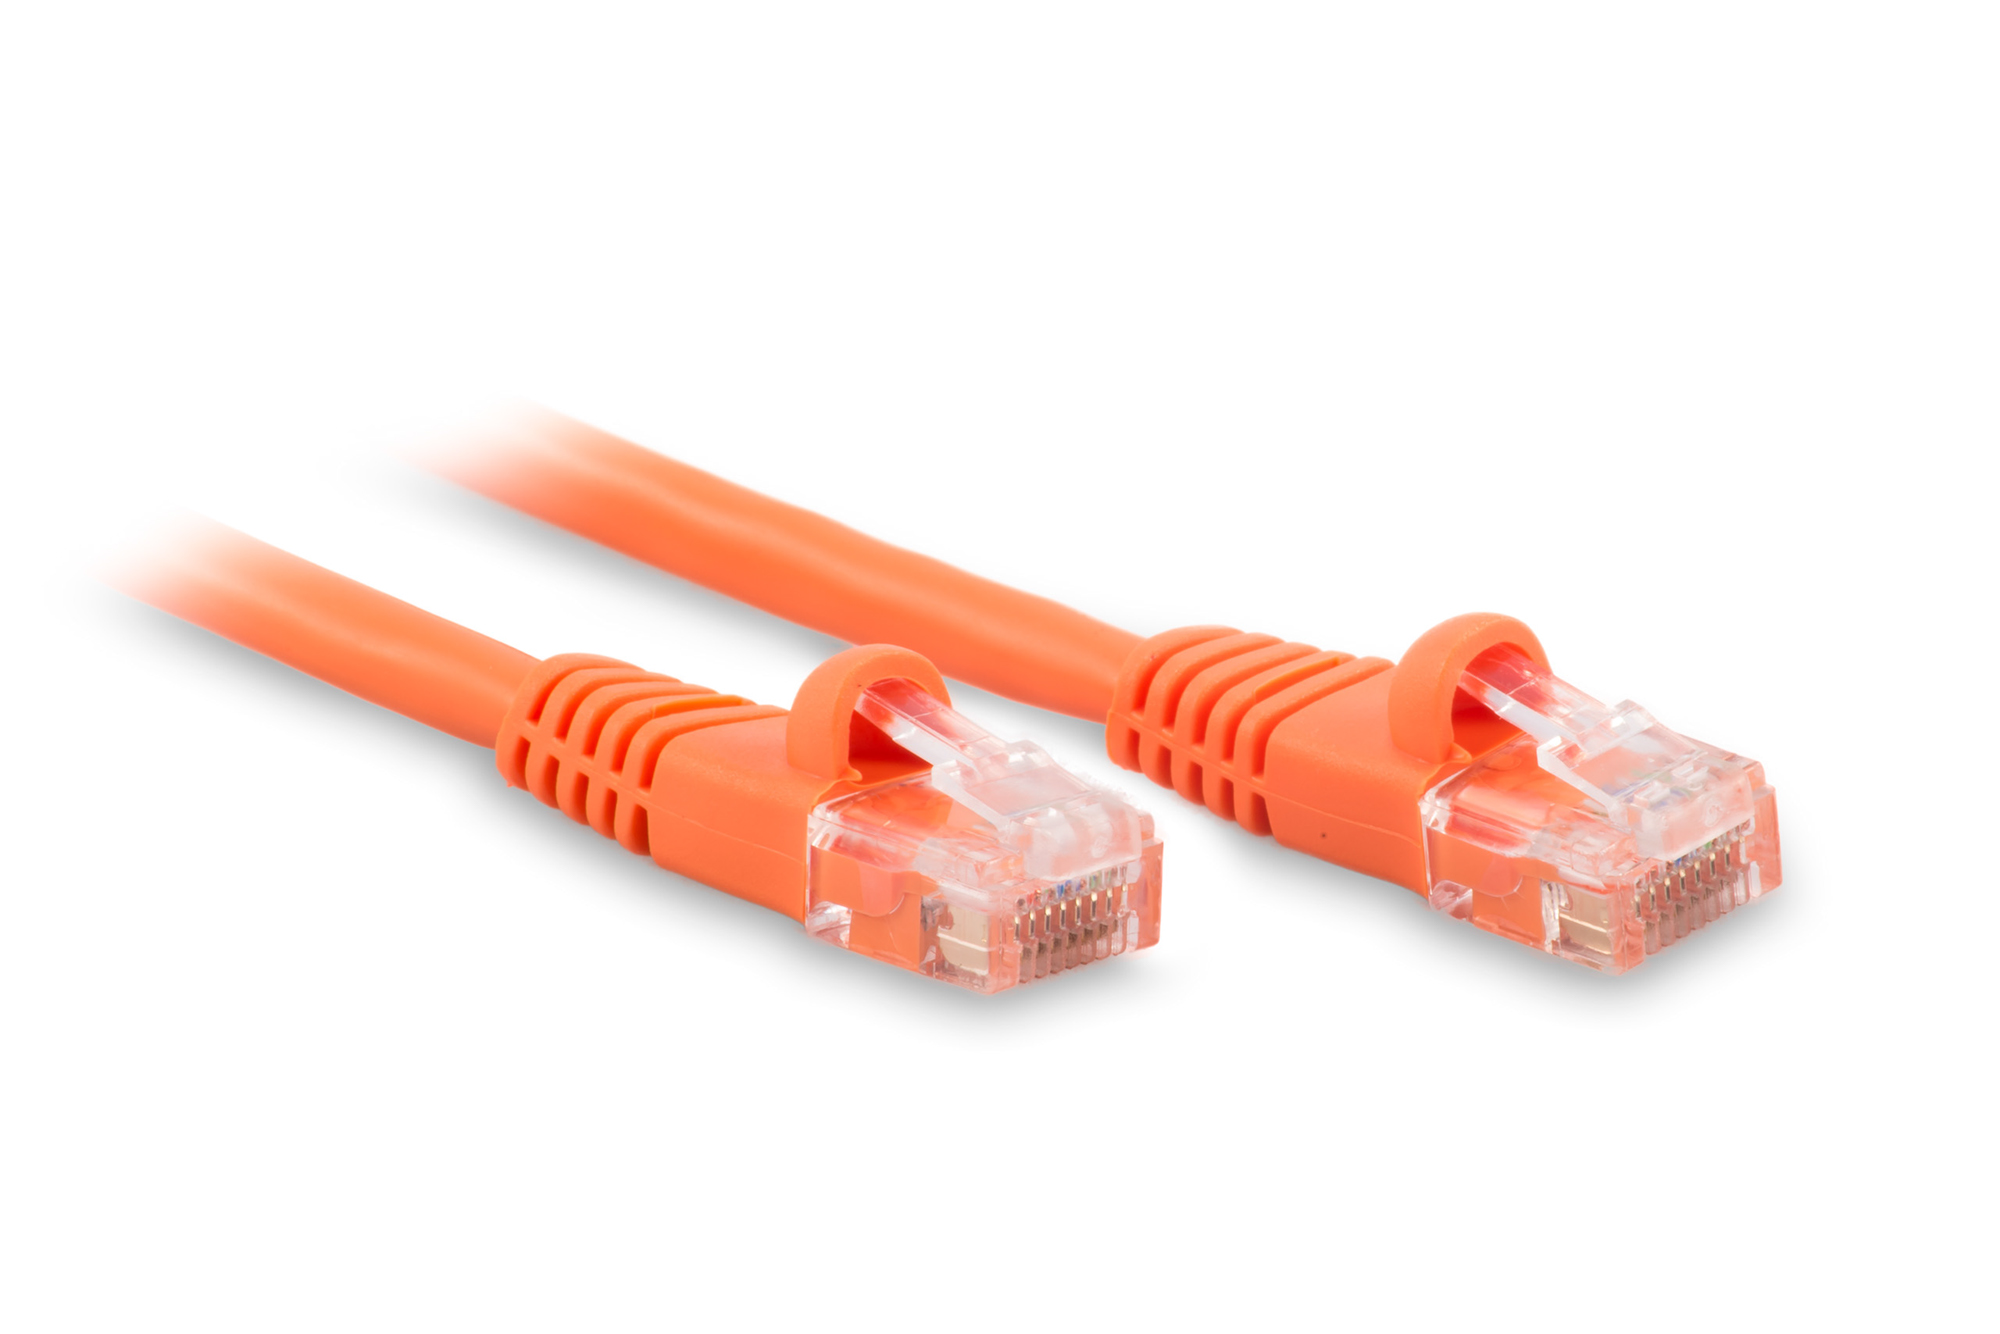 0.5ft Cat6 Ethernet Patch Cable - Orange Color - Snagless Boot